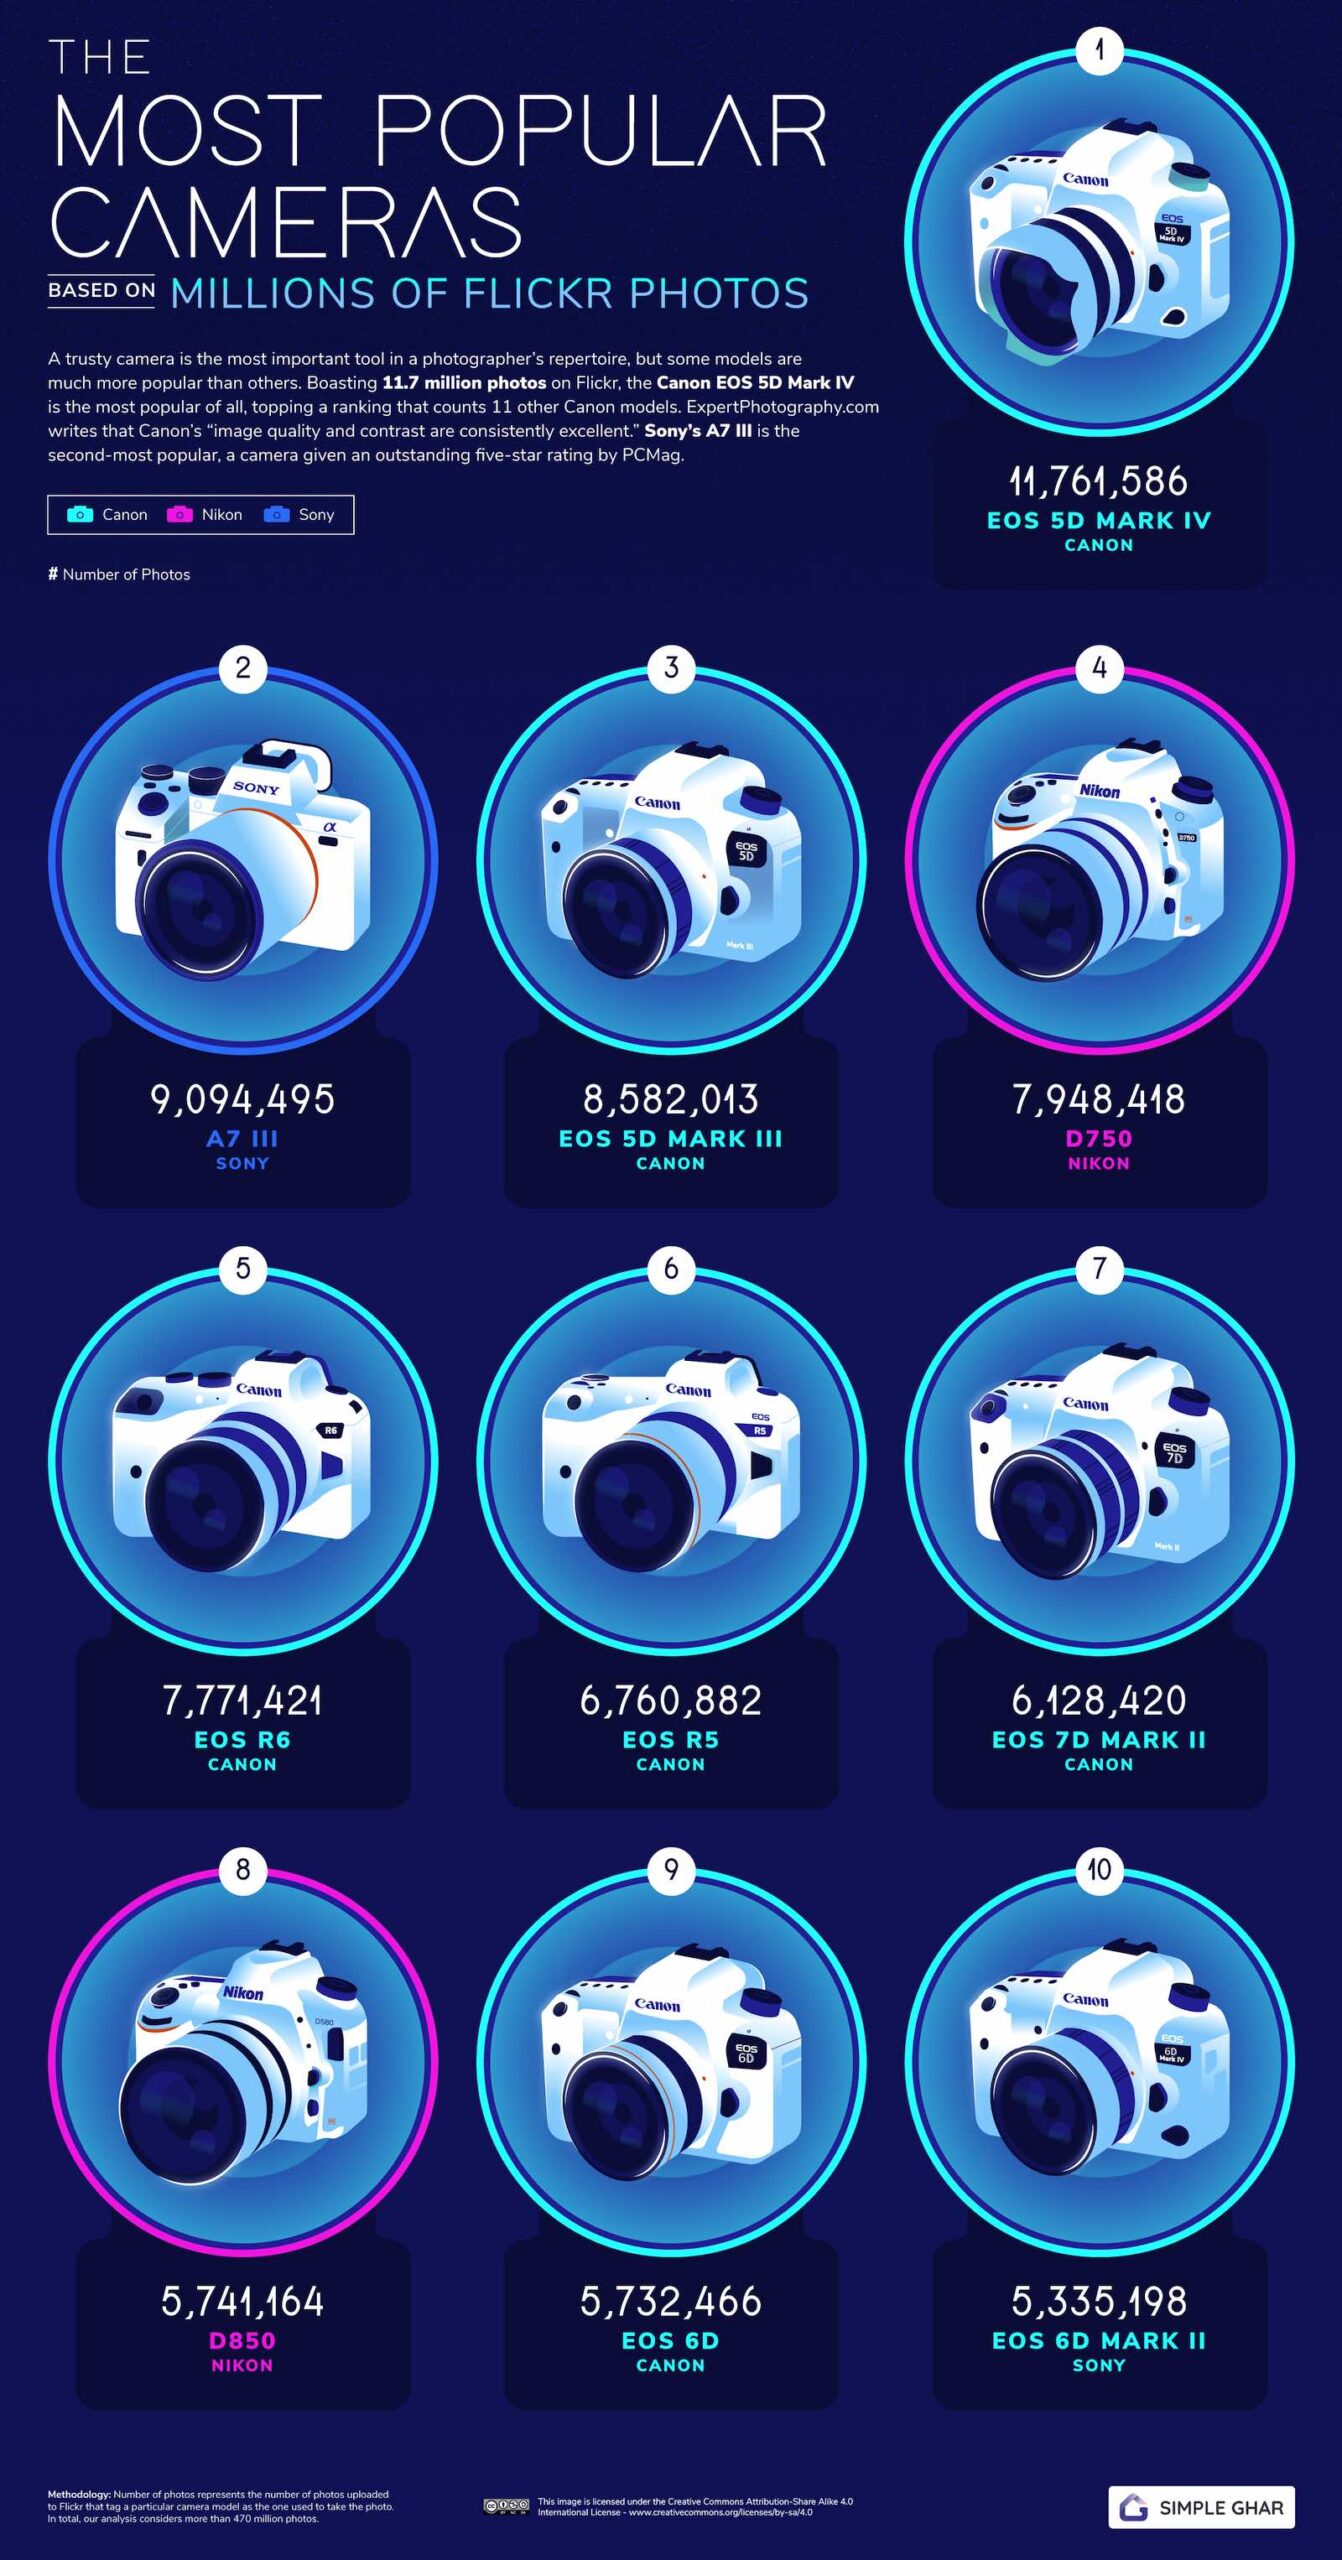 Flickr-study-reveals-the-most-popular-cameras-around-the-world-2-scaled.jpg